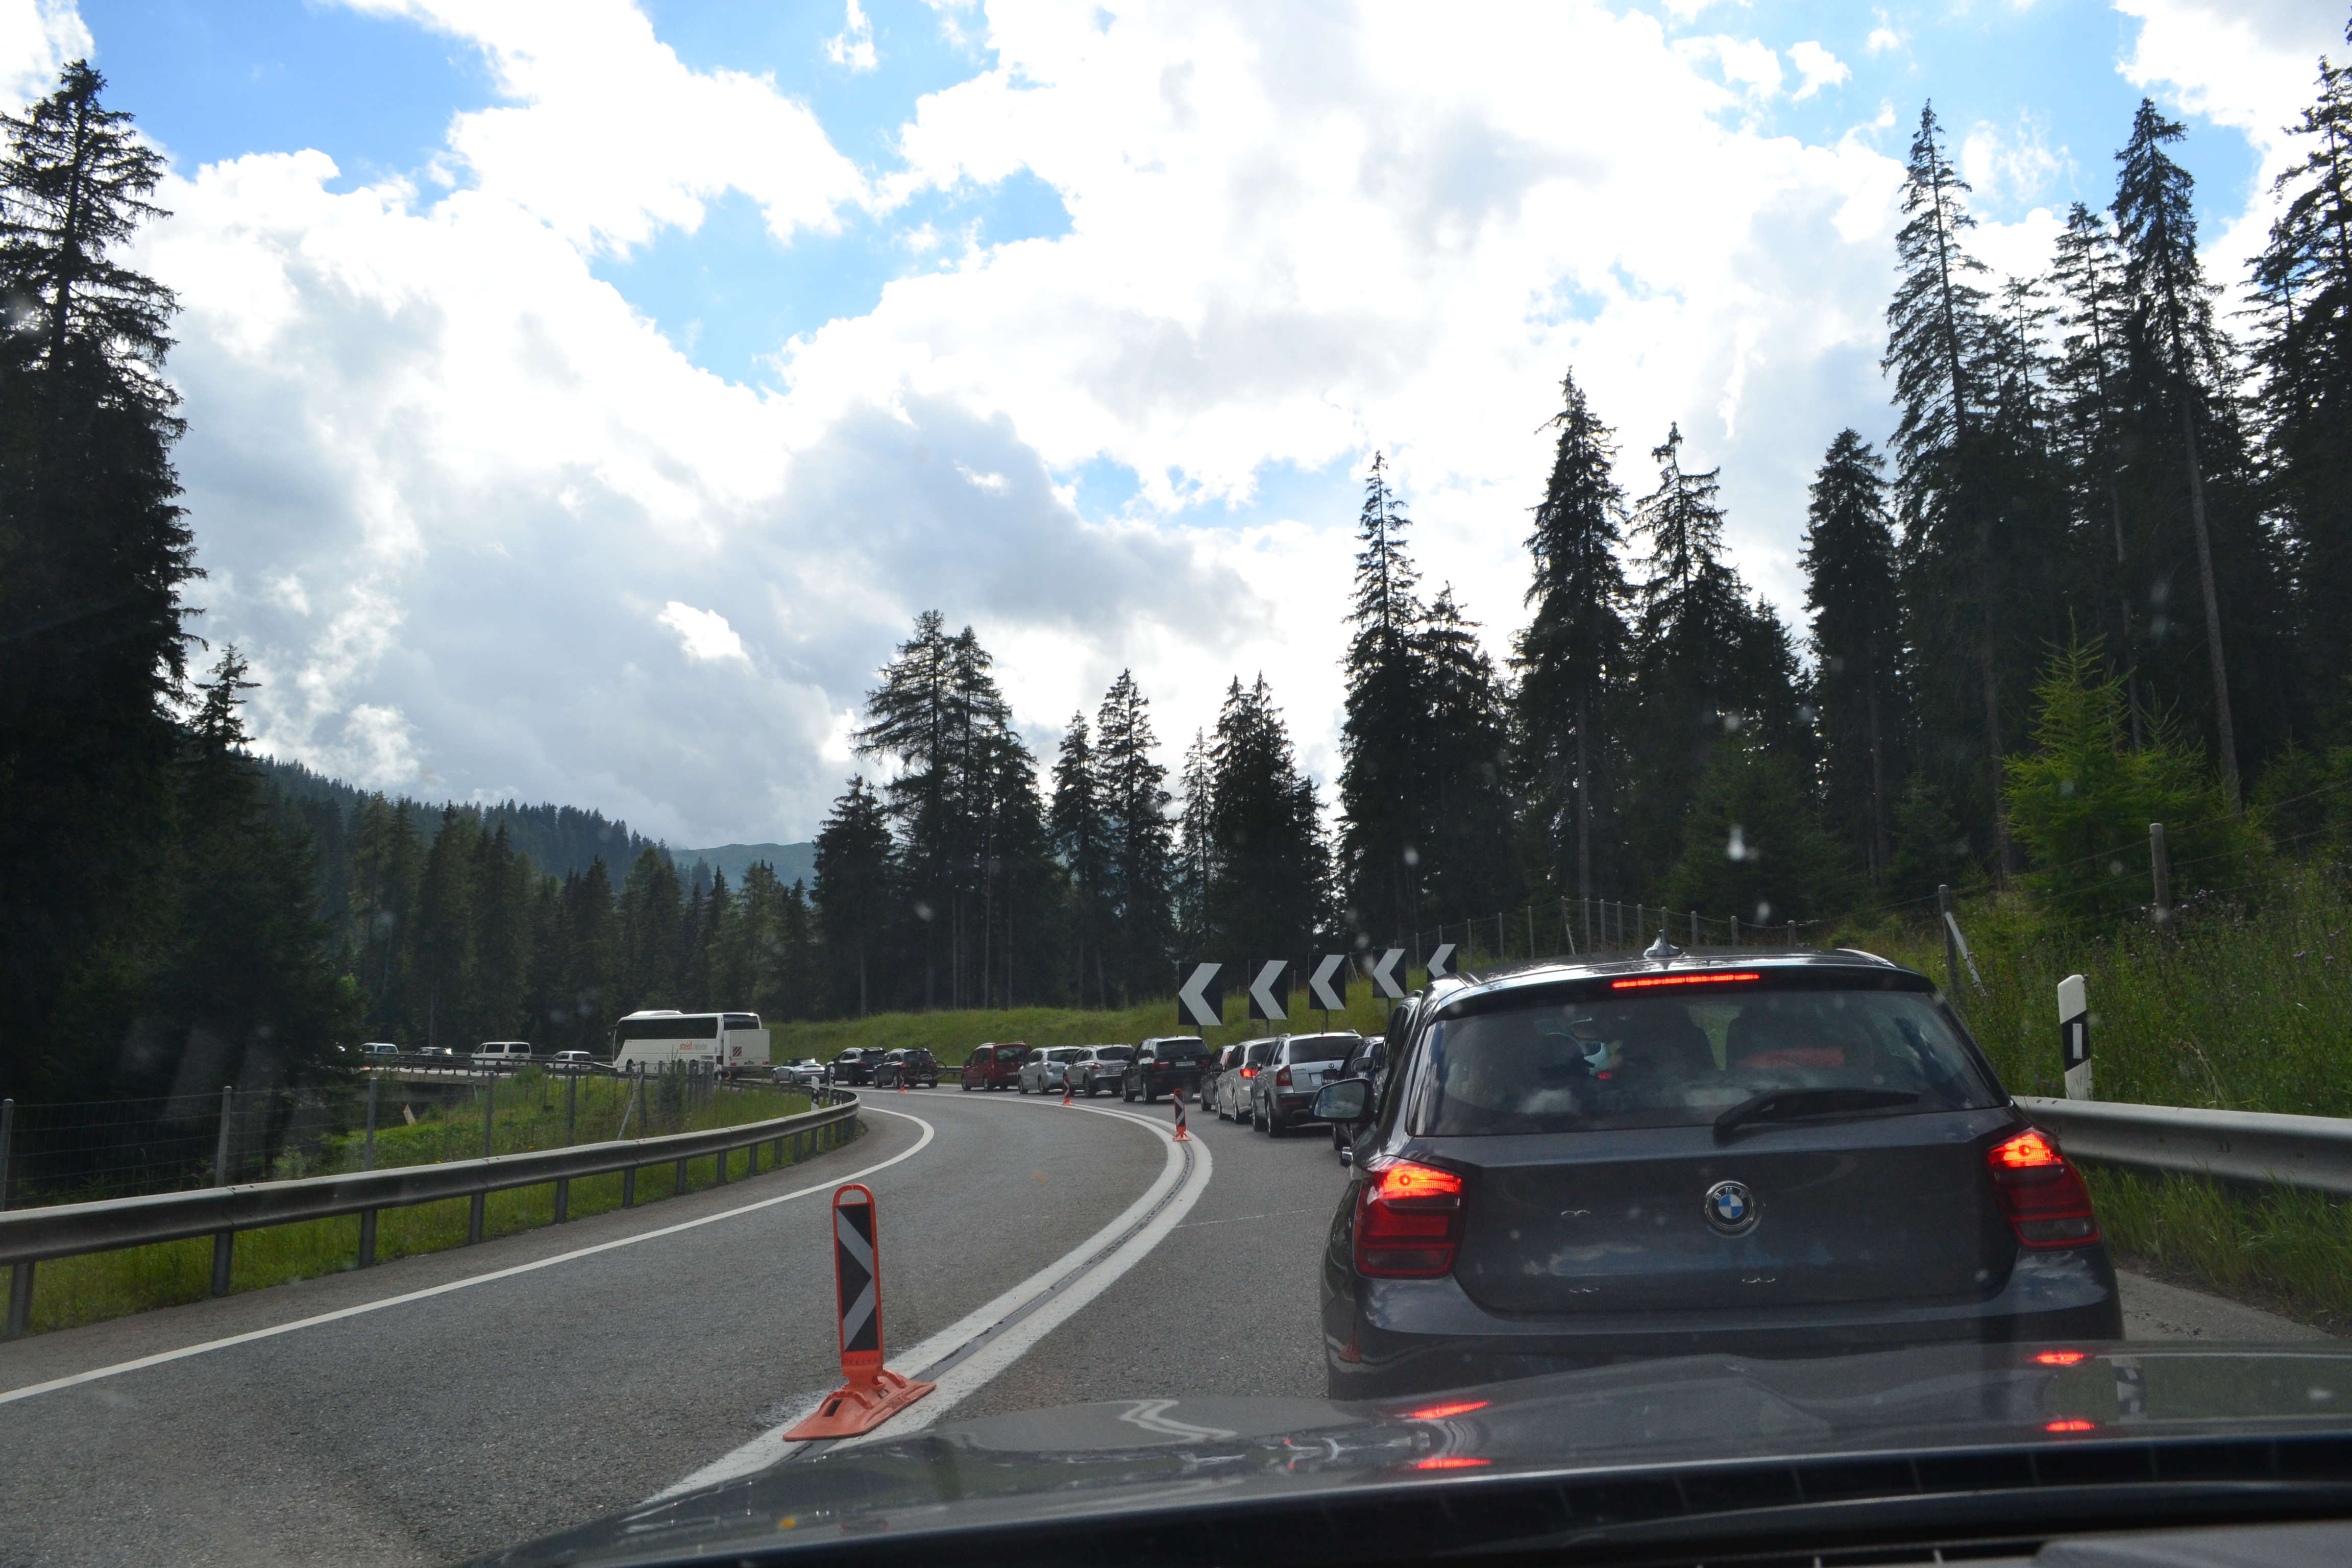 A traffic jam in Switzerland. Don't worry, the car was in park when I snapped this picture.